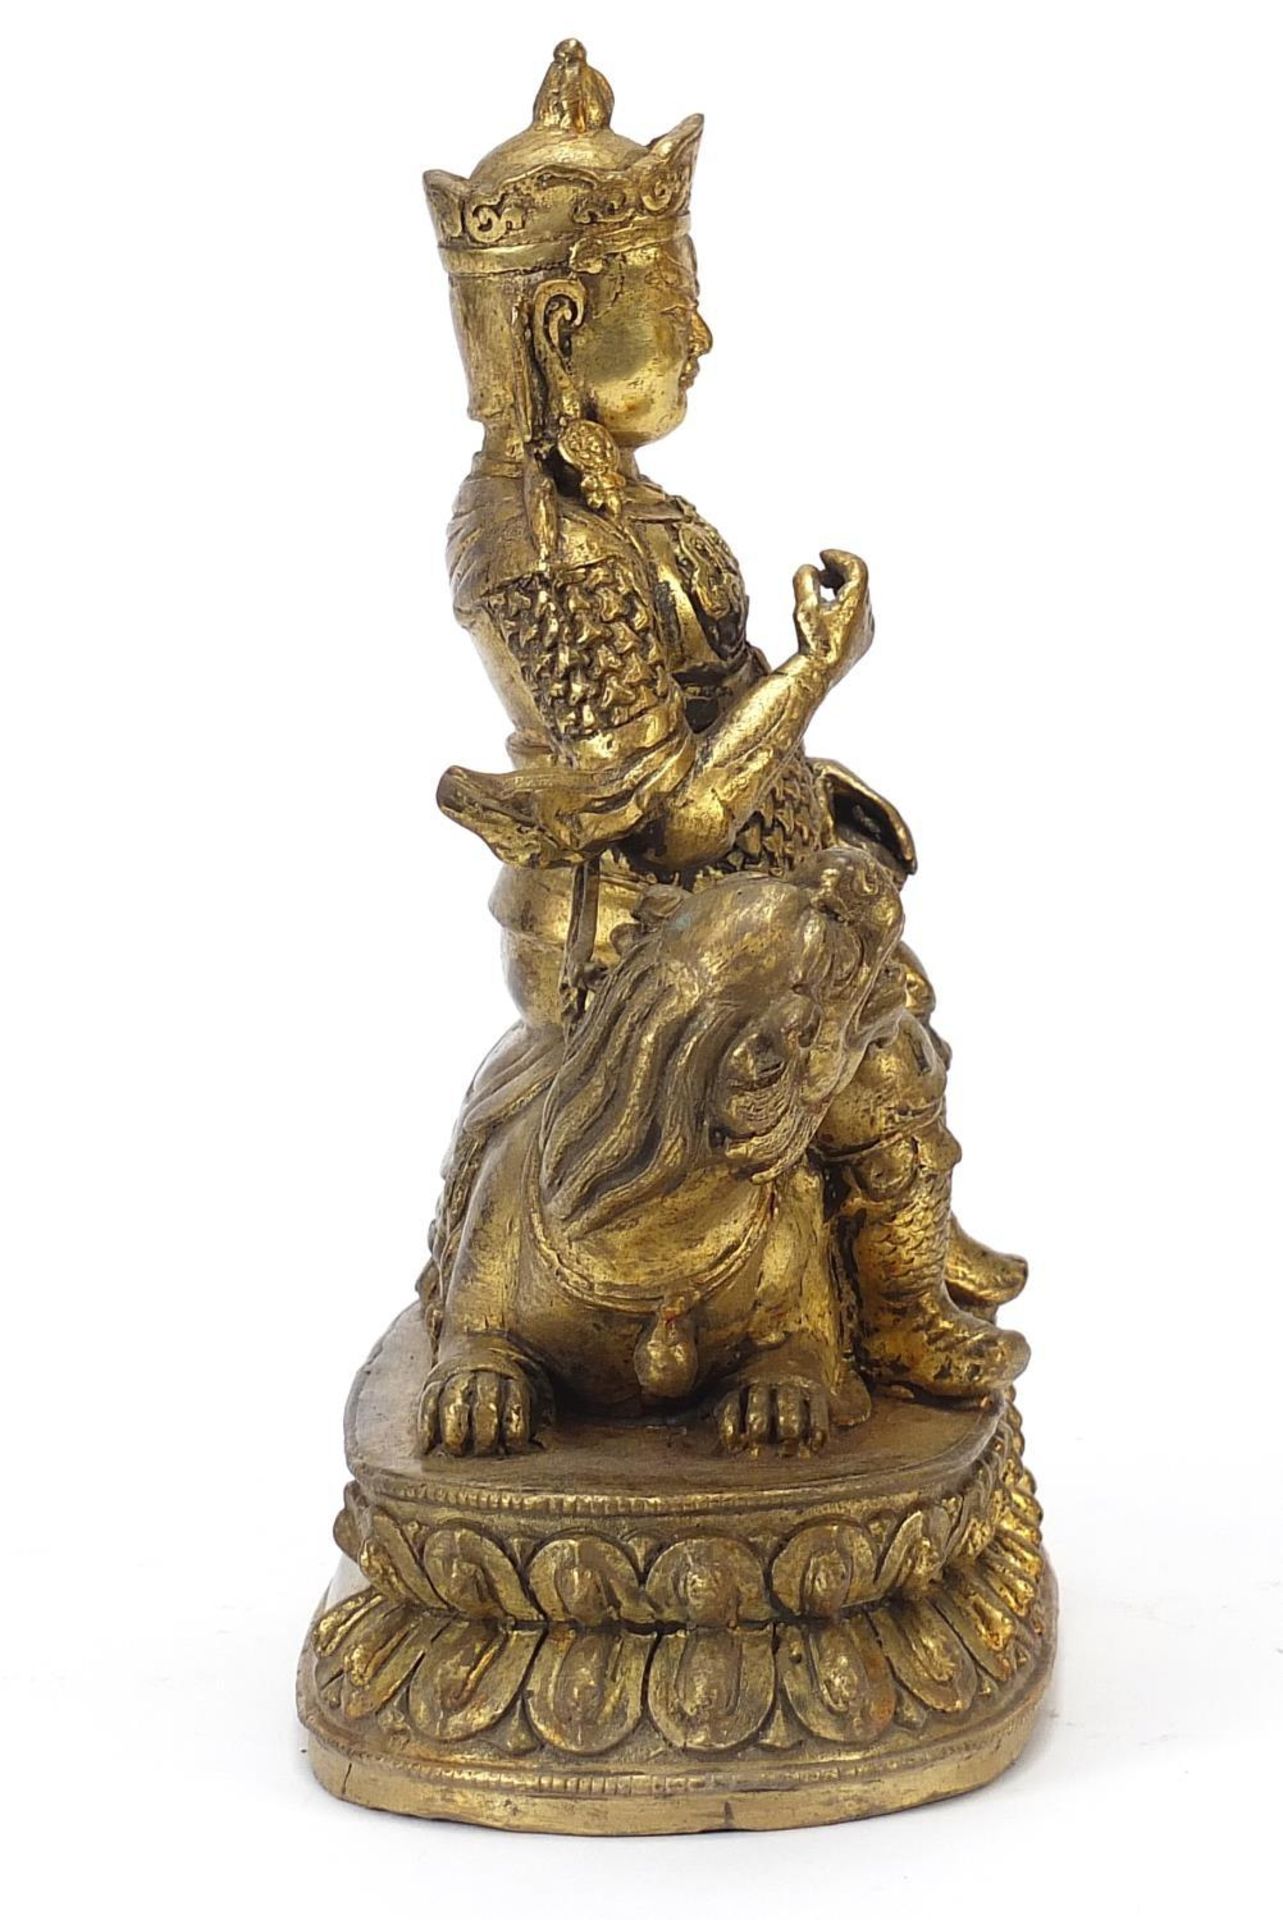 Chino Tibetan patinated gilt bronze figure of an Emperor on mythical animal, 23.5cm high - Image 5 of 8